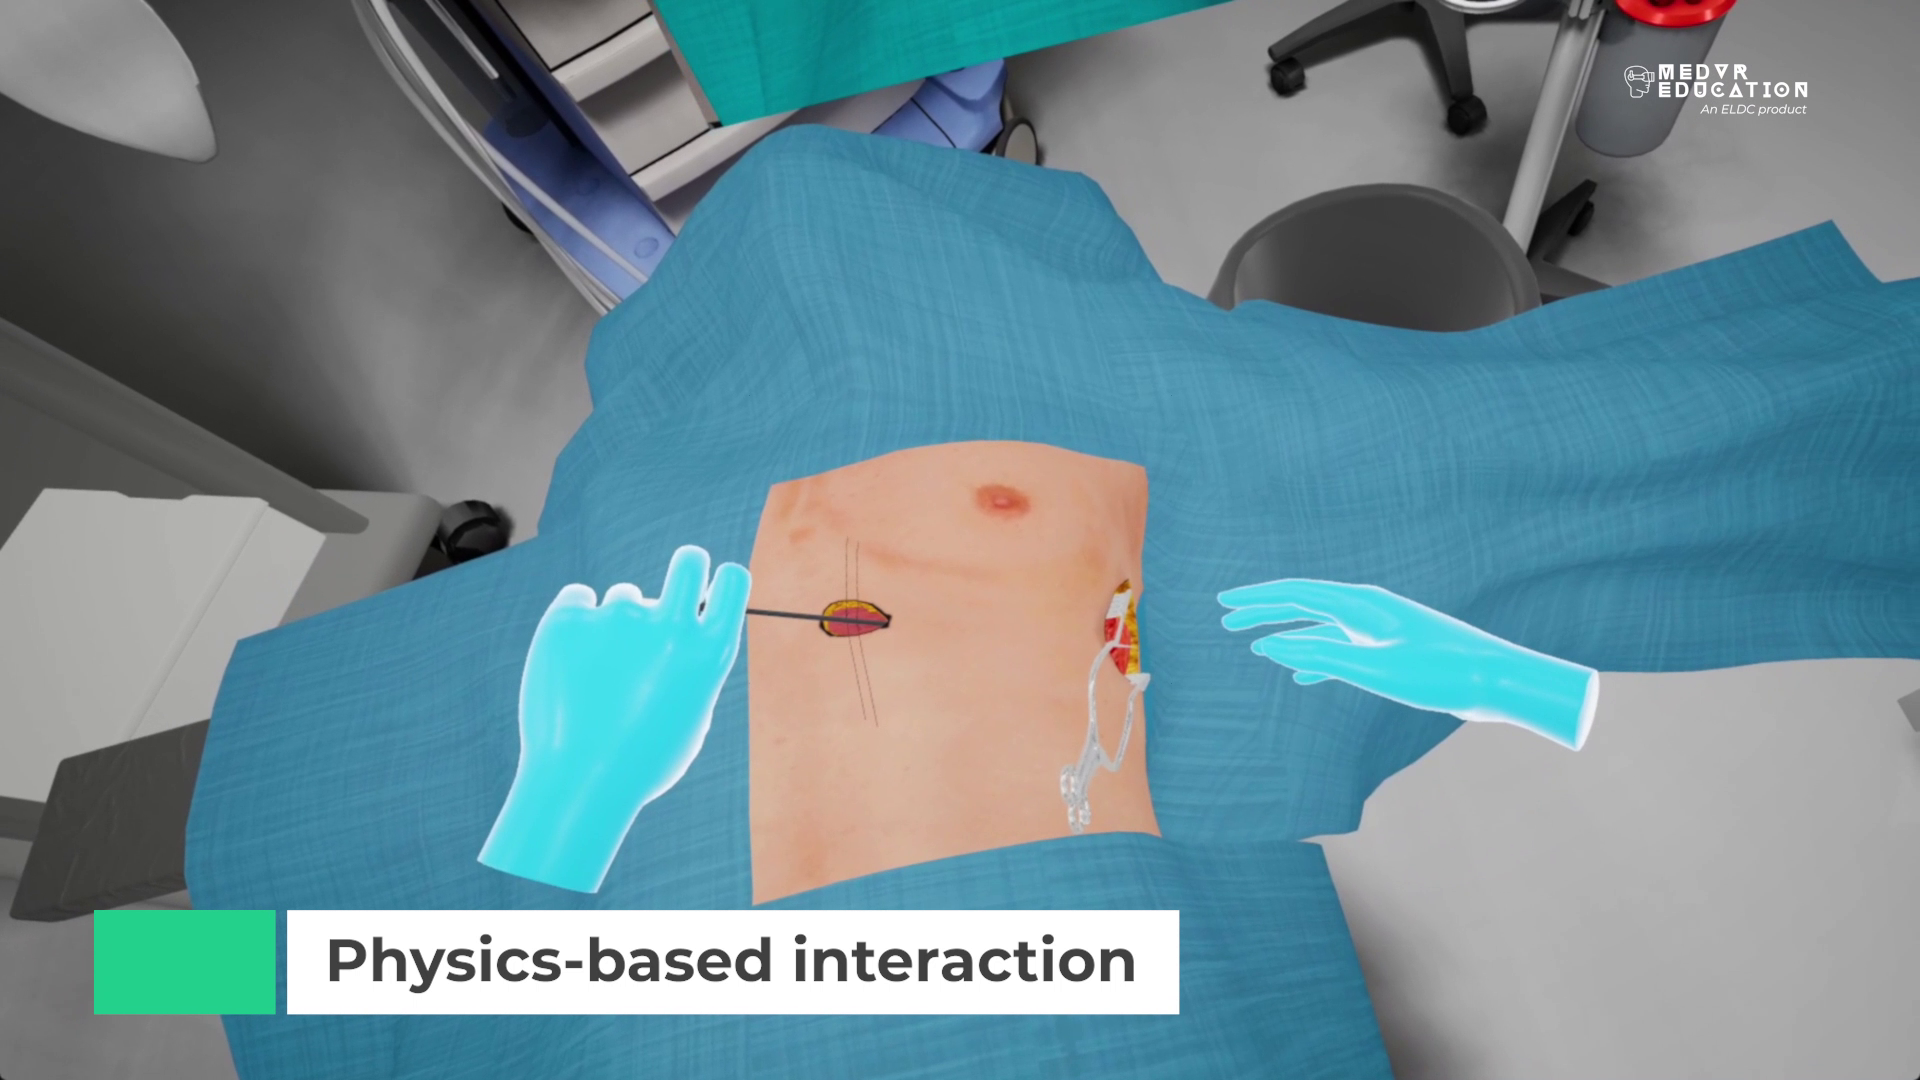 Performing S-ICD procedure in VR